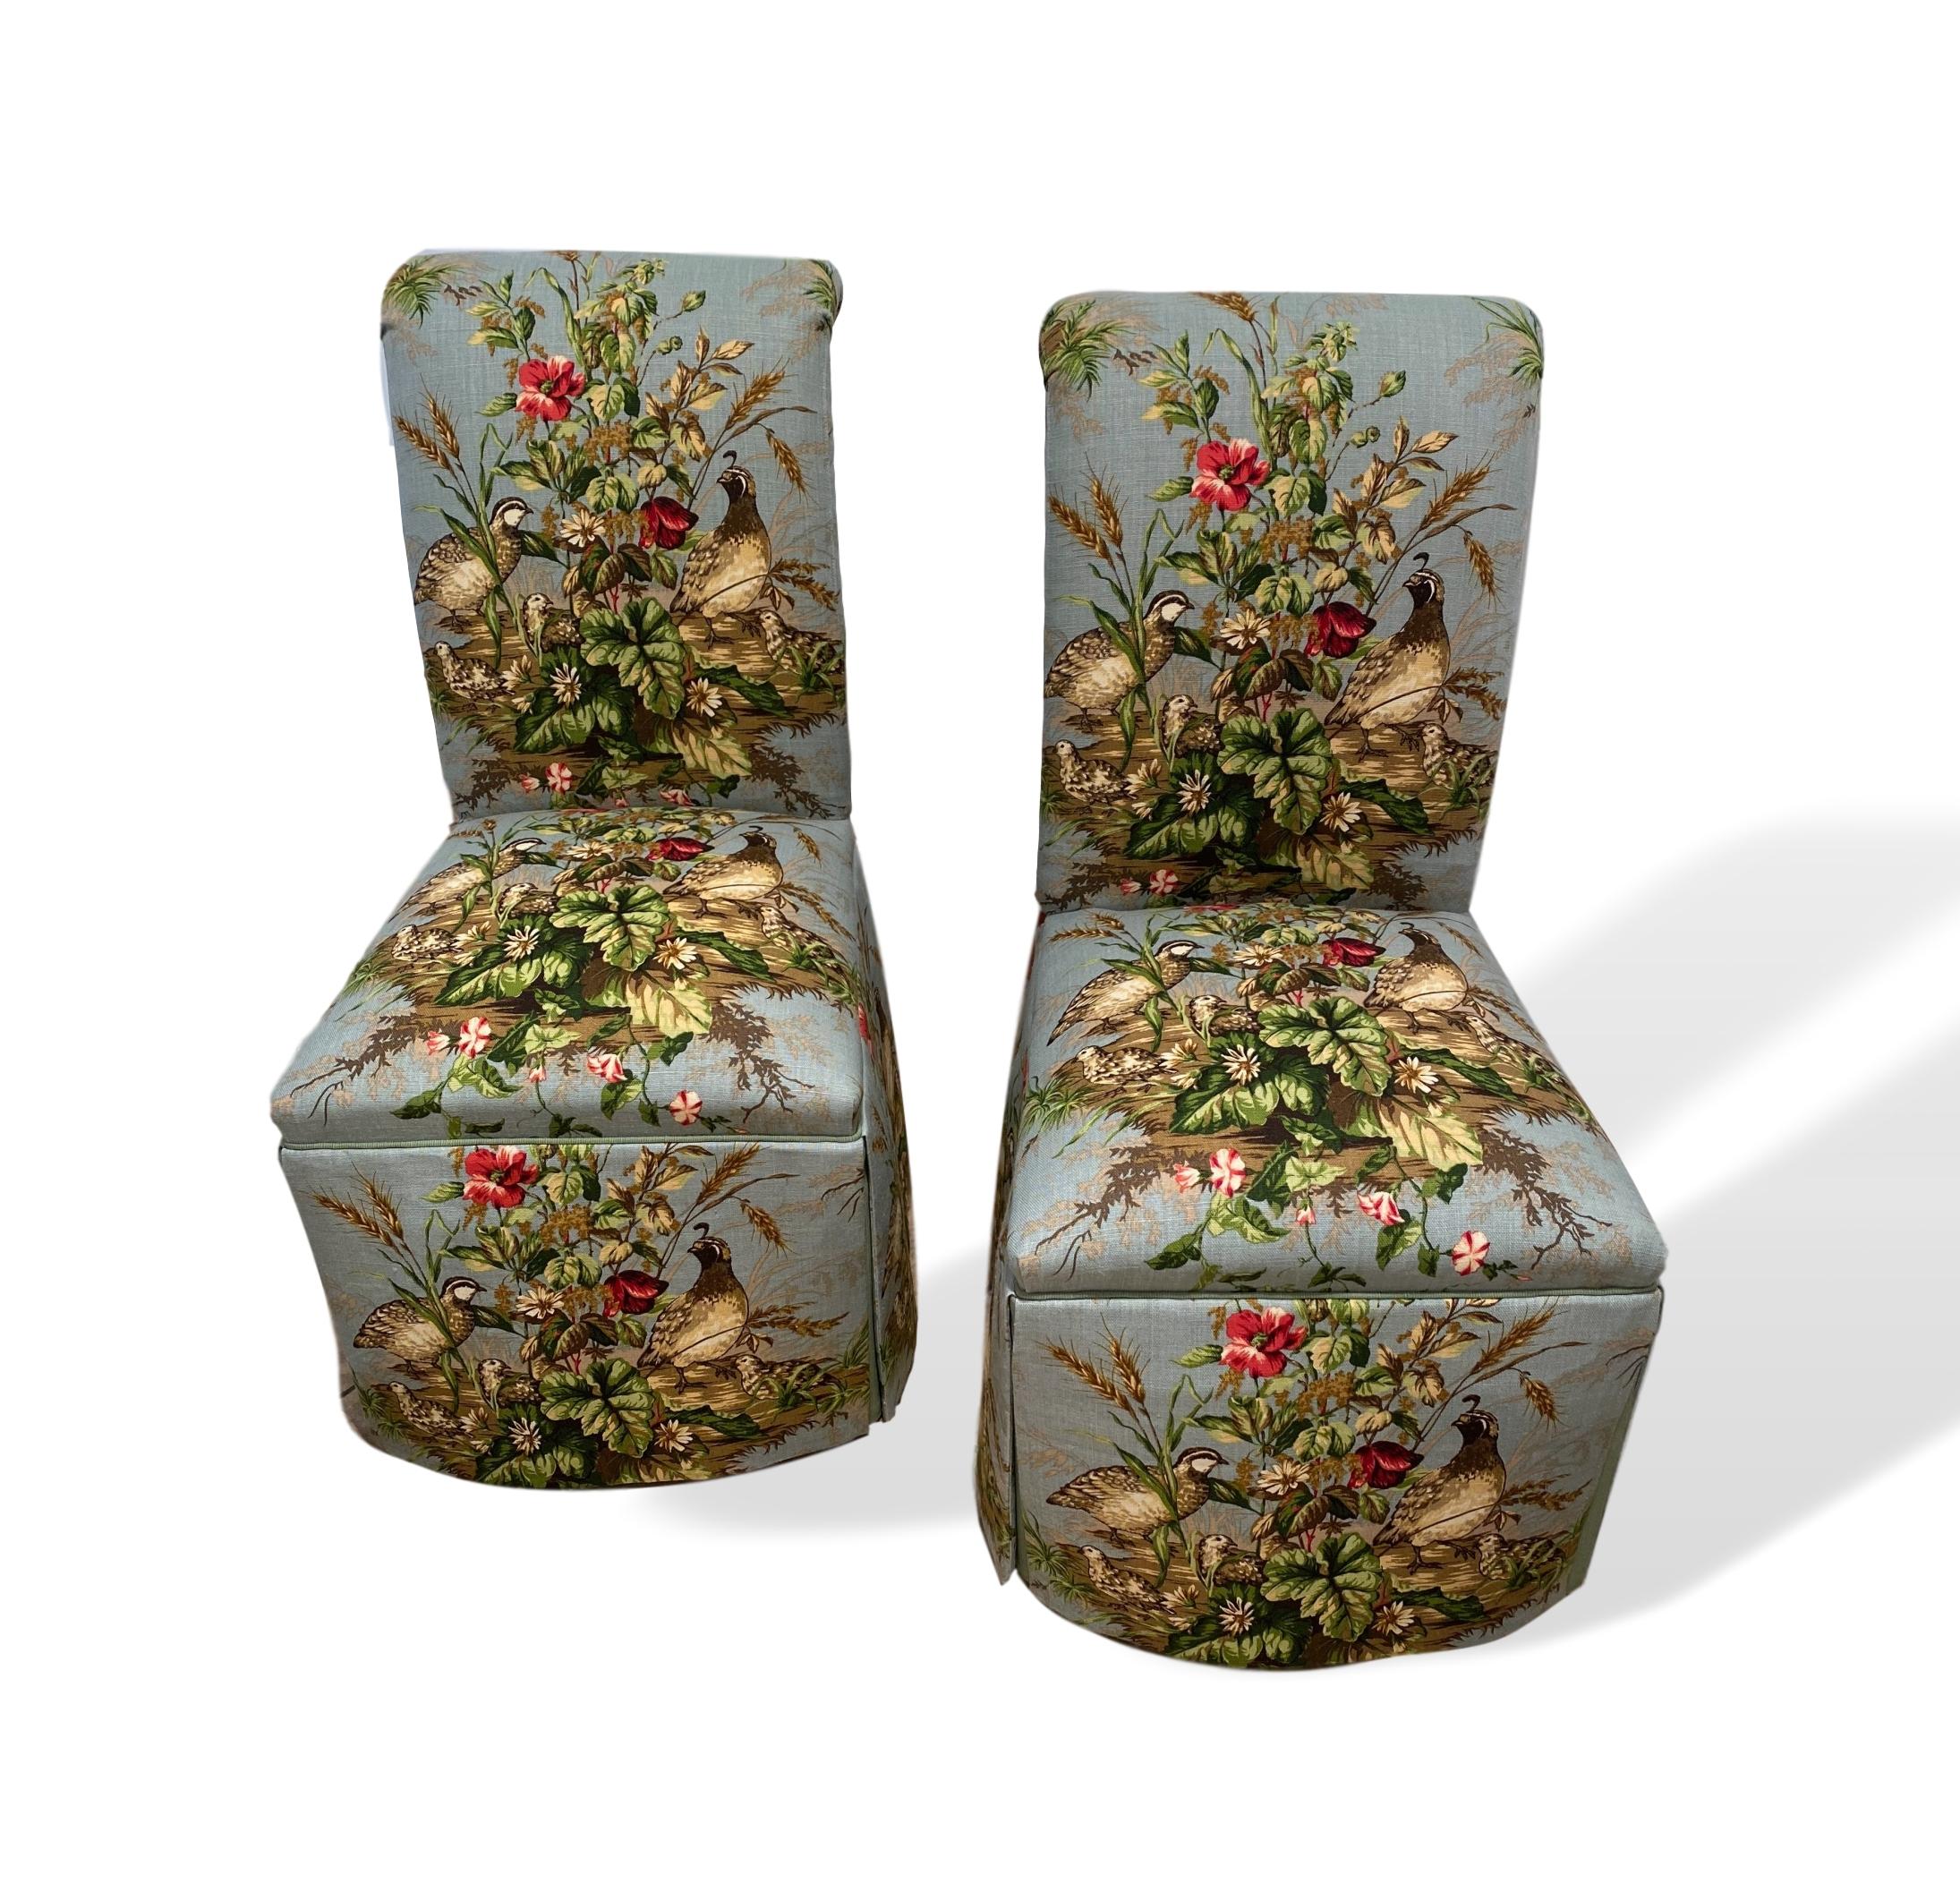 Pair of brand-new Parsons chairs in Scalamandré iconic fabric 'Edwin's Covey' multi on London blue (SKU: SC-0004-16310 Price: $298 per yard with a 2-yard minimum per order--this pair took 10 yards). This is one of the most instantly recognizable